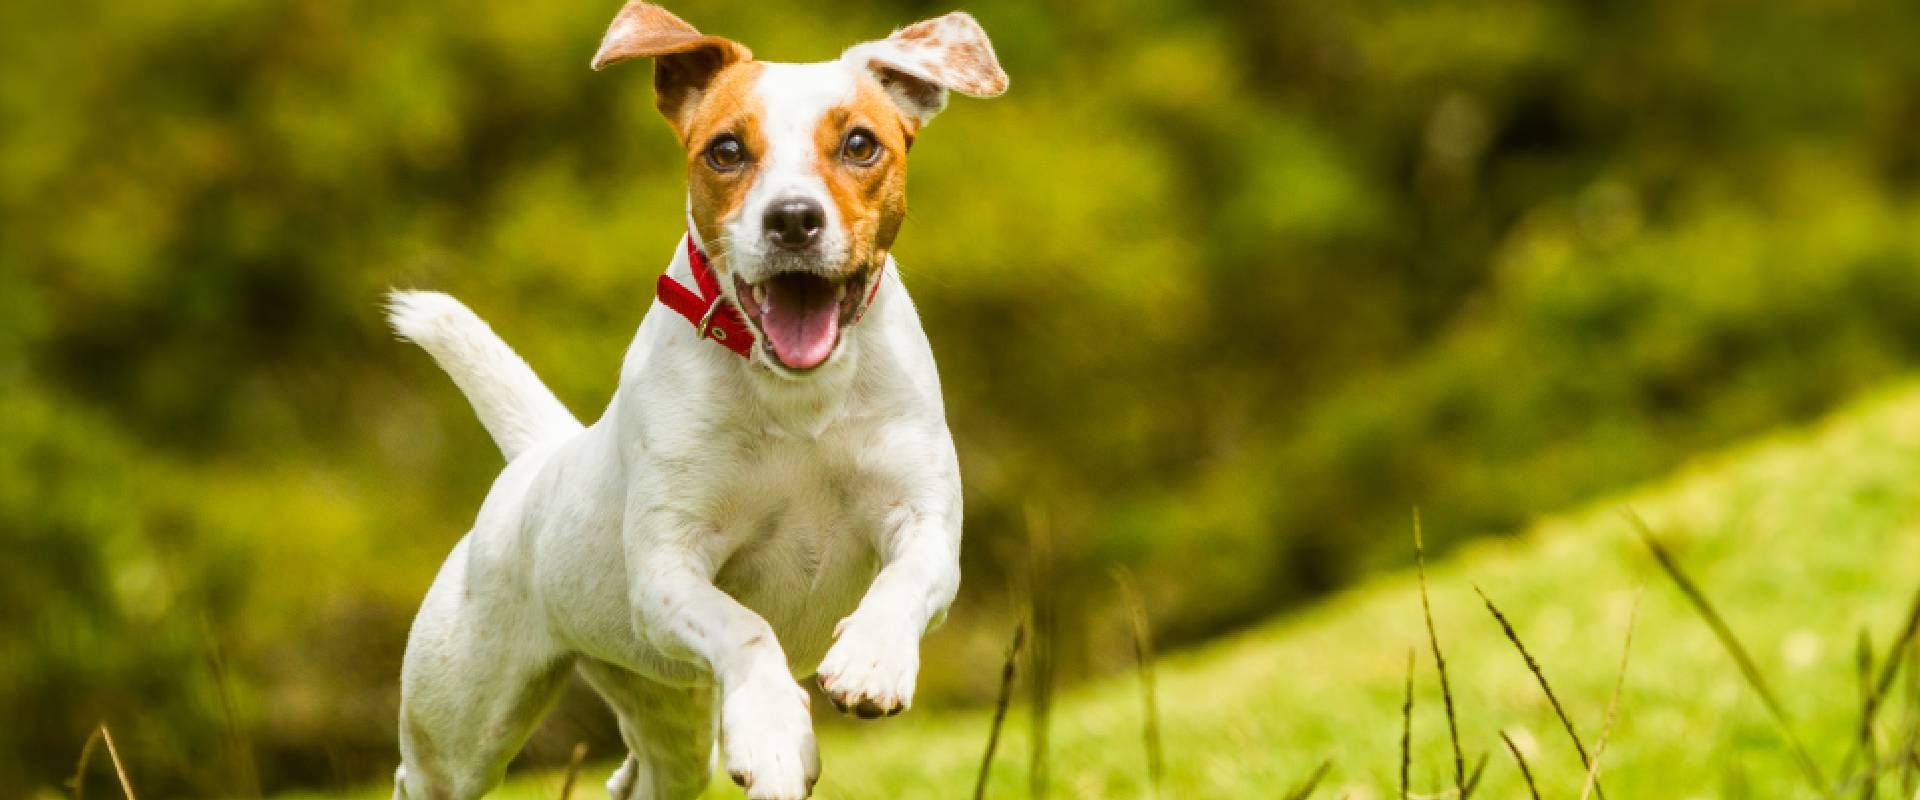 Jack Russell Terrier - a descendent of the English White Terrier